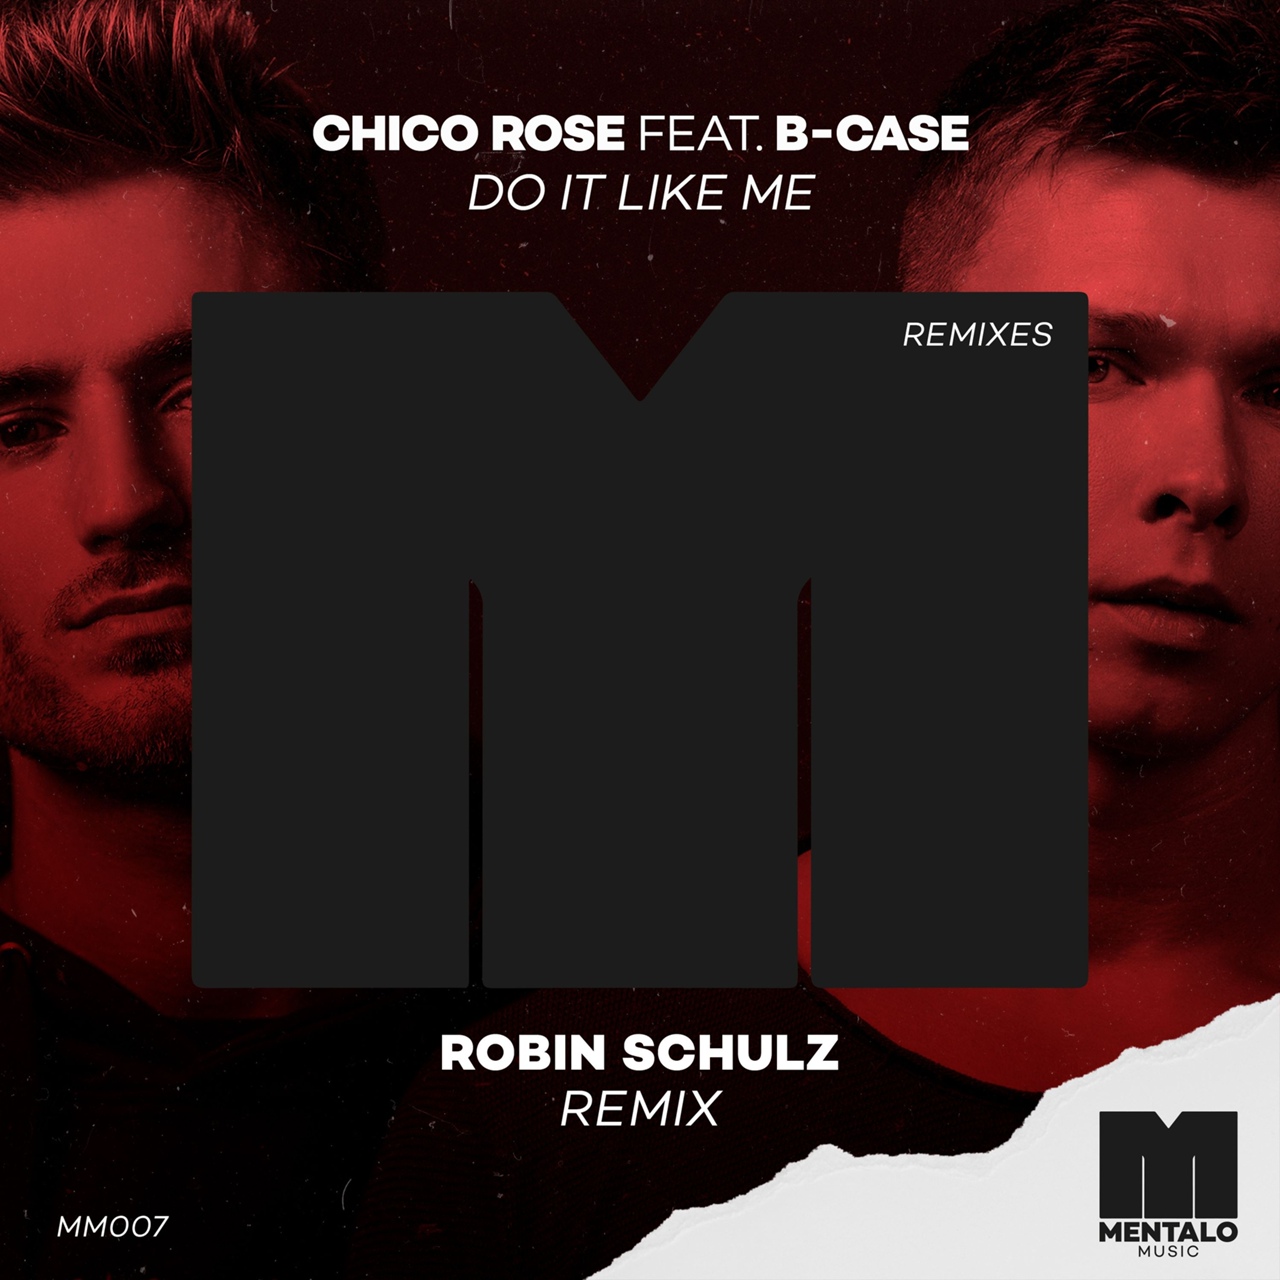 Chico Rose feat. B-Case - Do It Like Me (Robin Schulz Extended Remix)